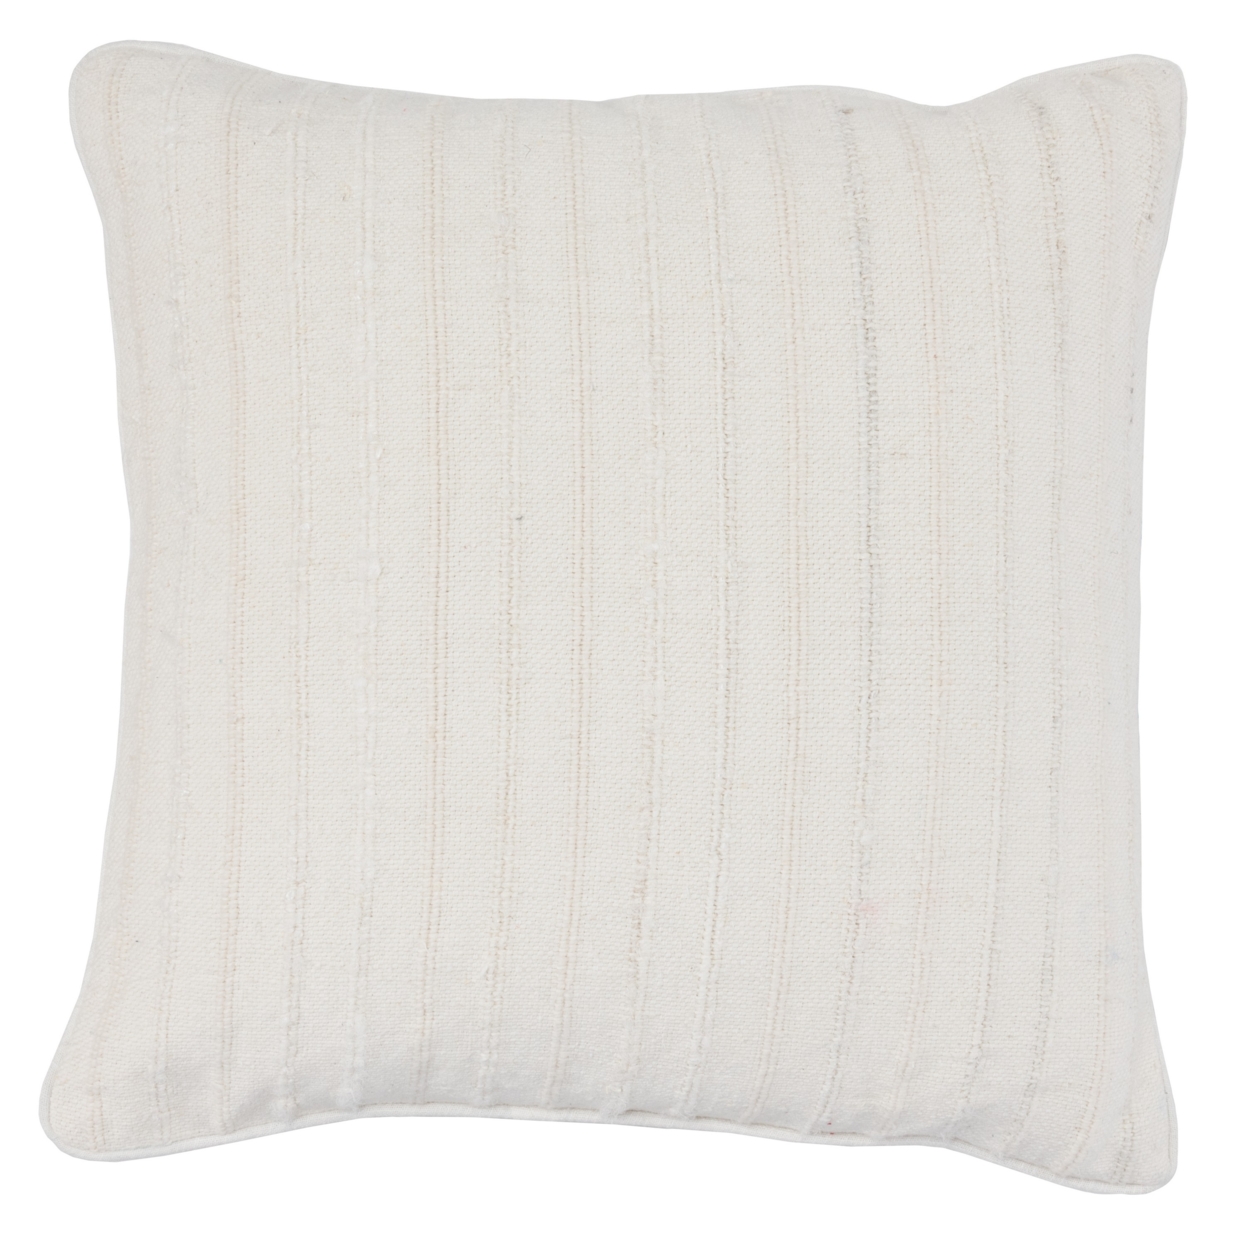 Textured Fabric Throw Pillow With Stripes Pattern And Piping, Off White- Saltoro Sherpi